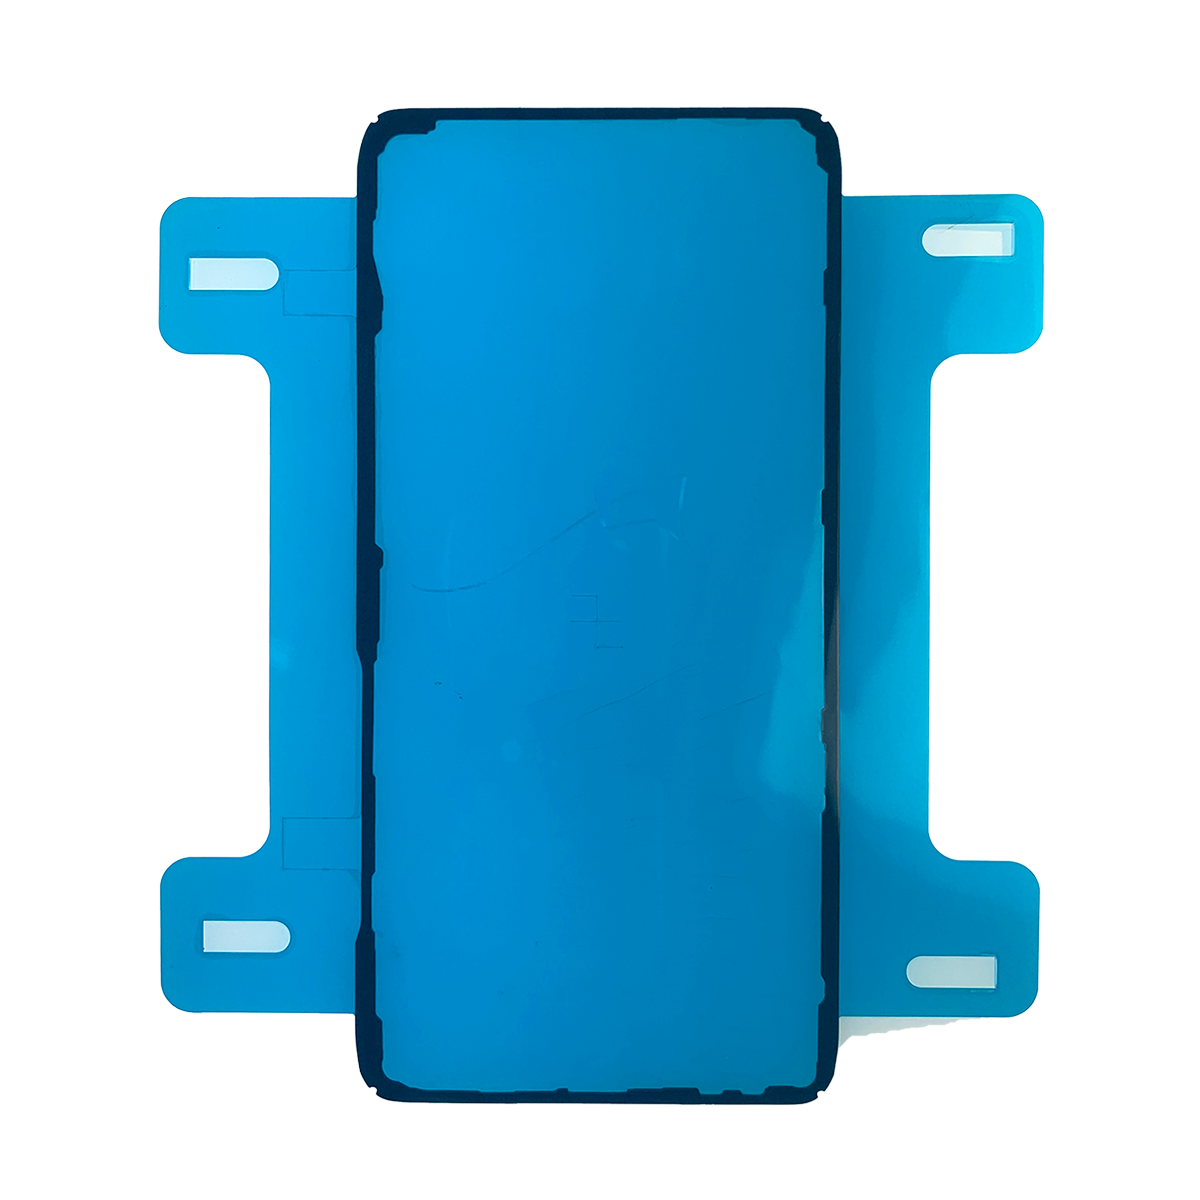 Samsung Galaxy S20 FE Back Cover Adhesive